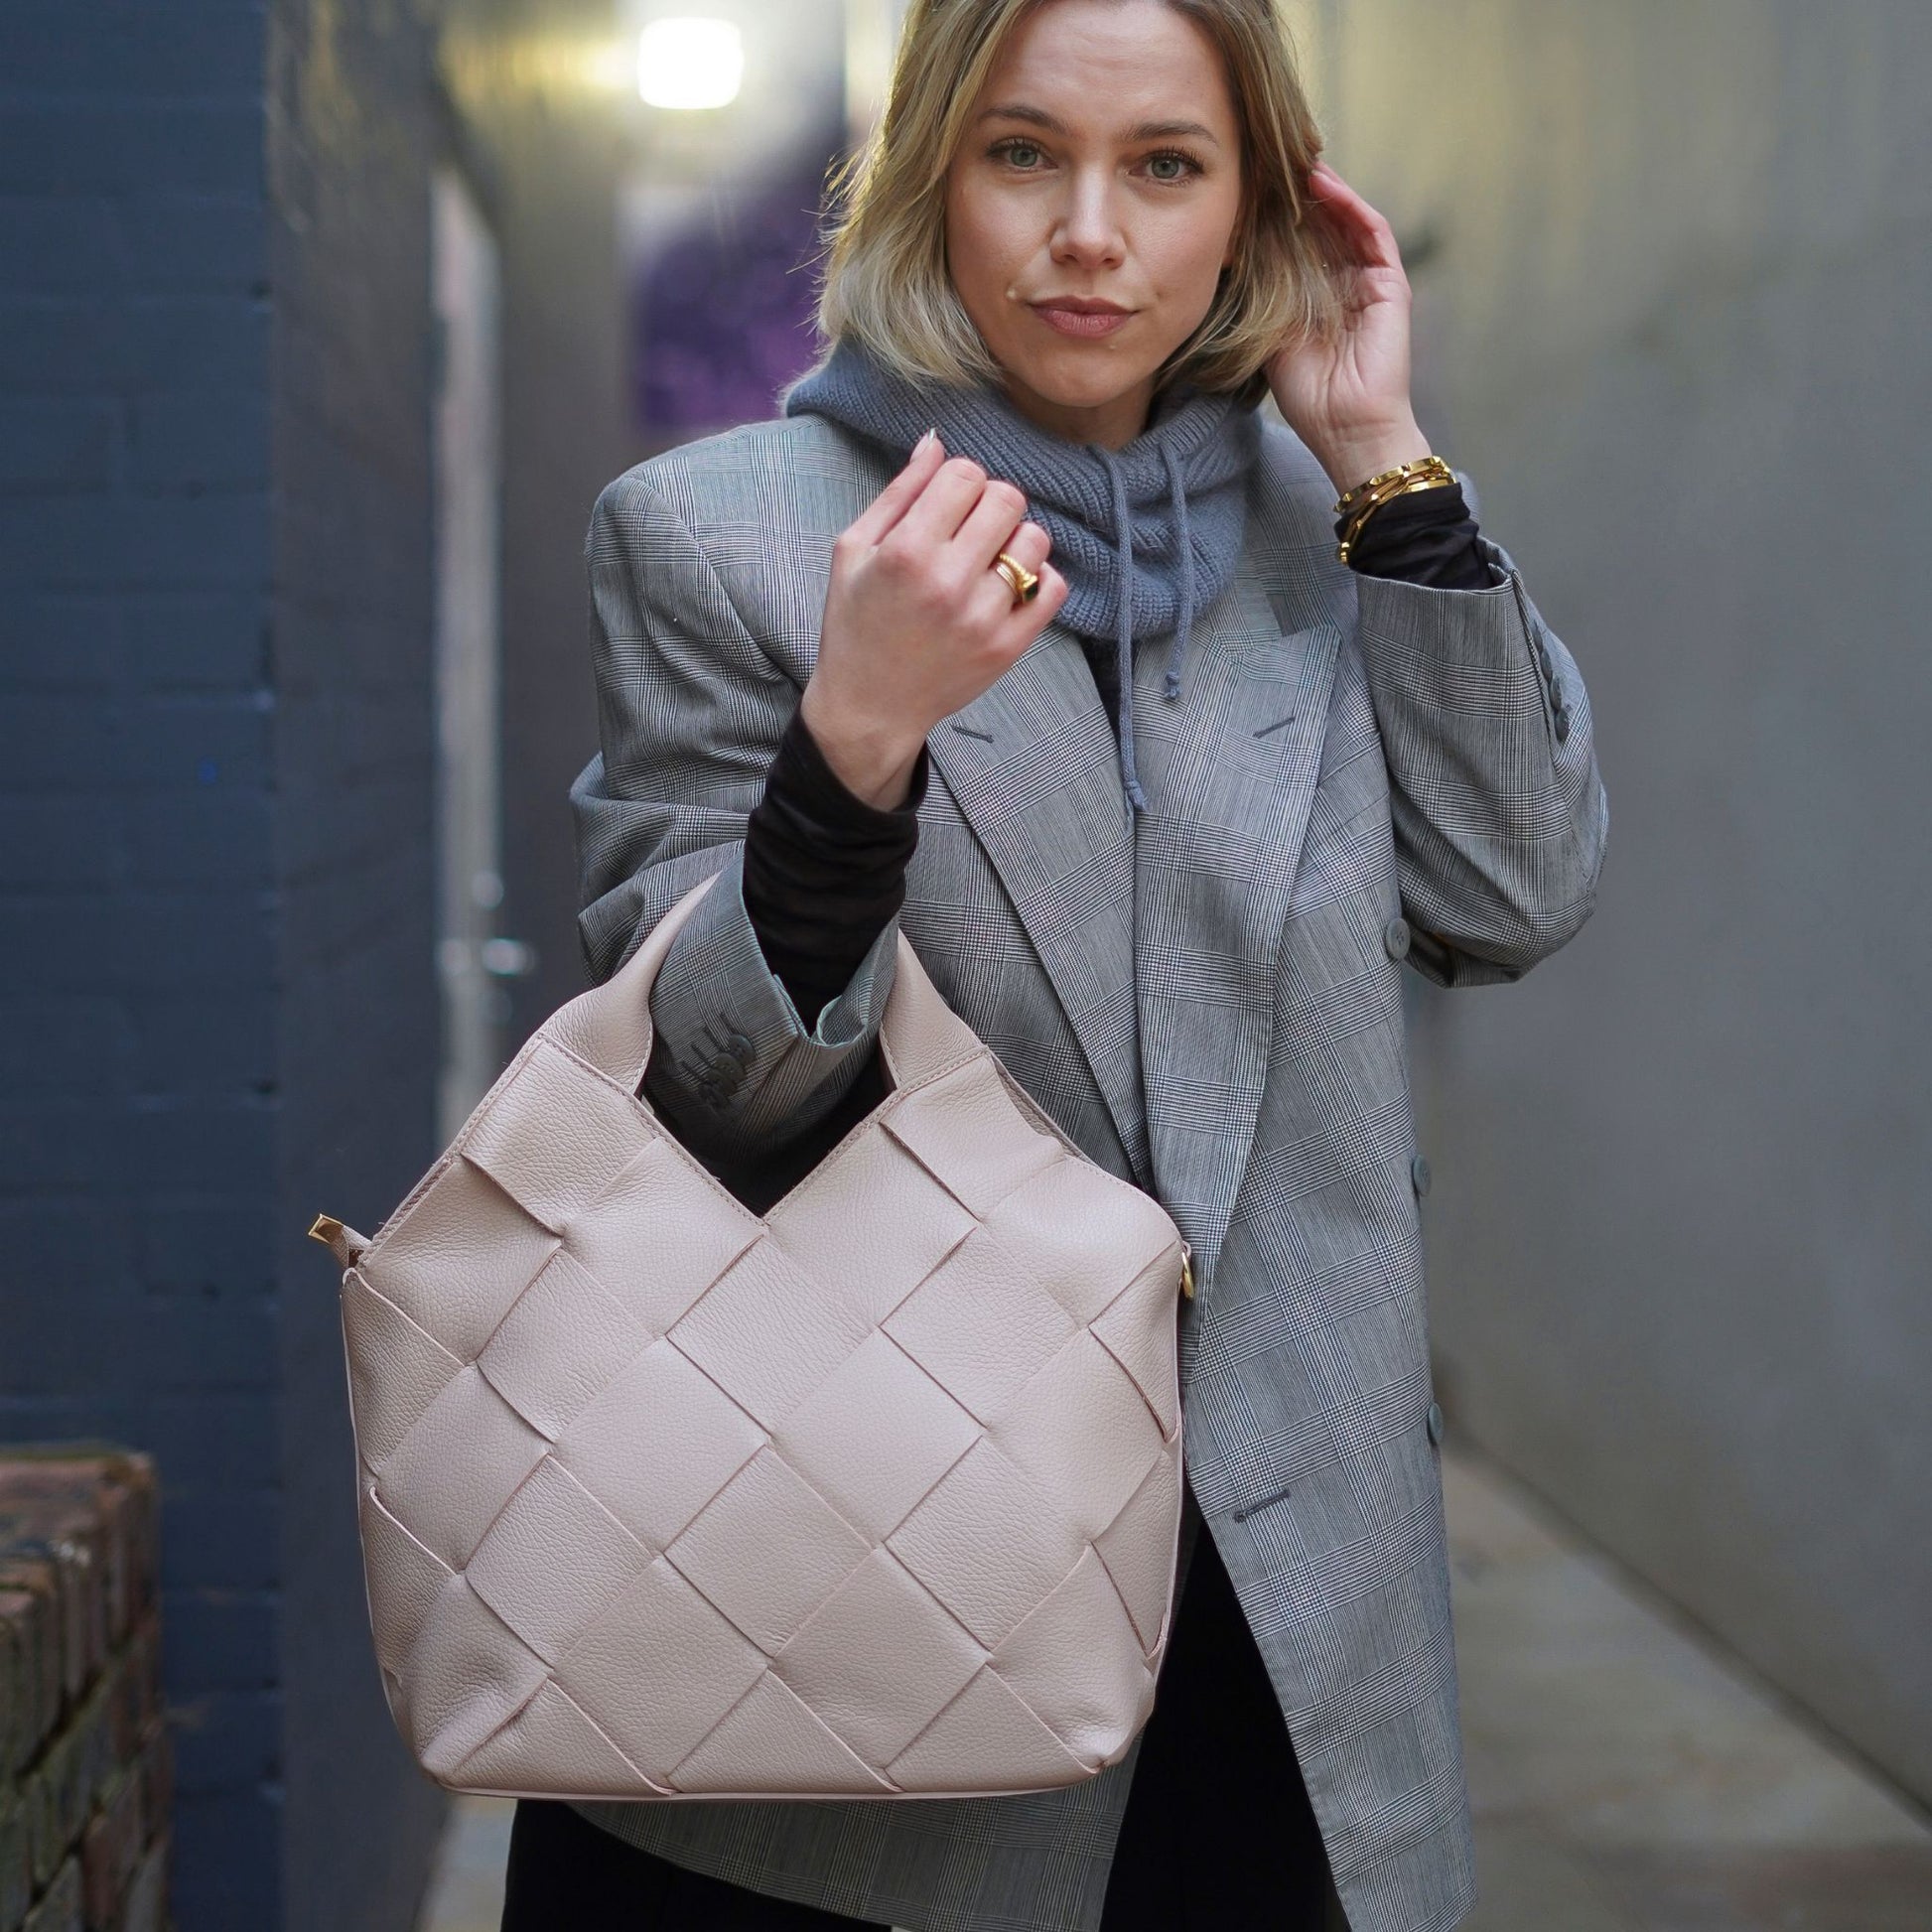 The Woven Leather Basket tote